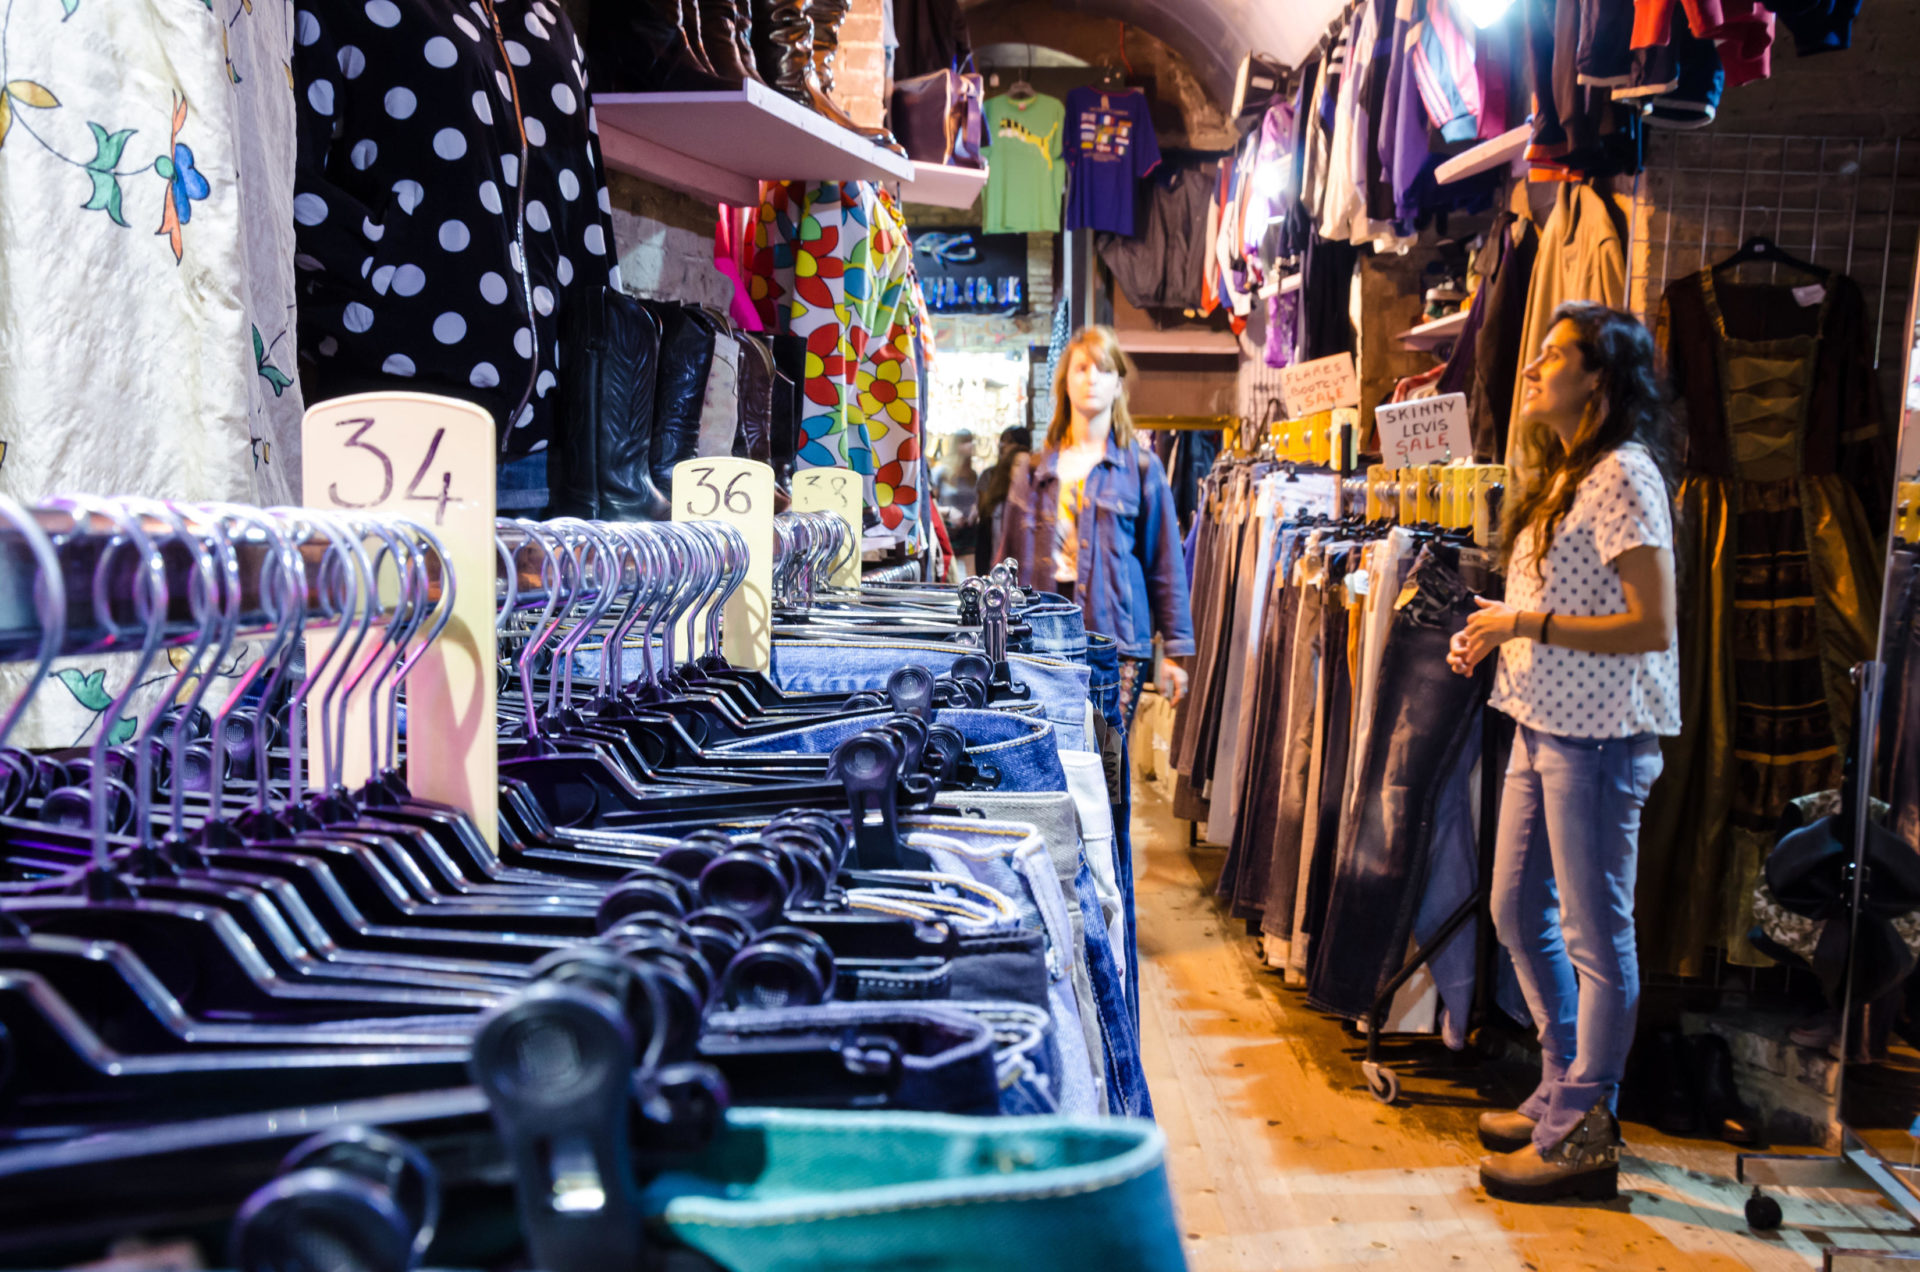 A stall selling trousers in London, UK